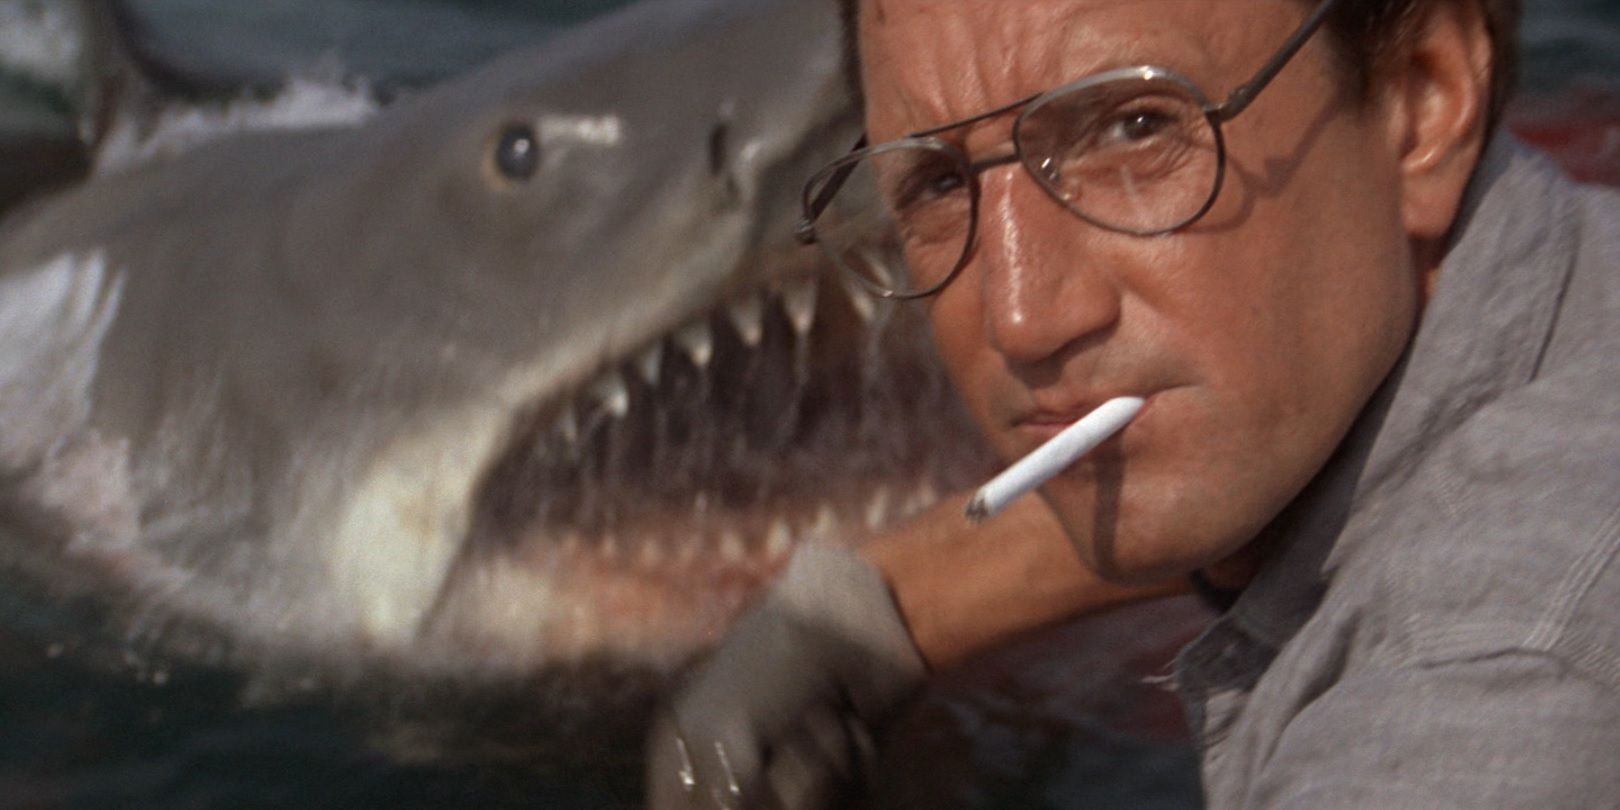 The shark breaches the water behind Brody in Jaws